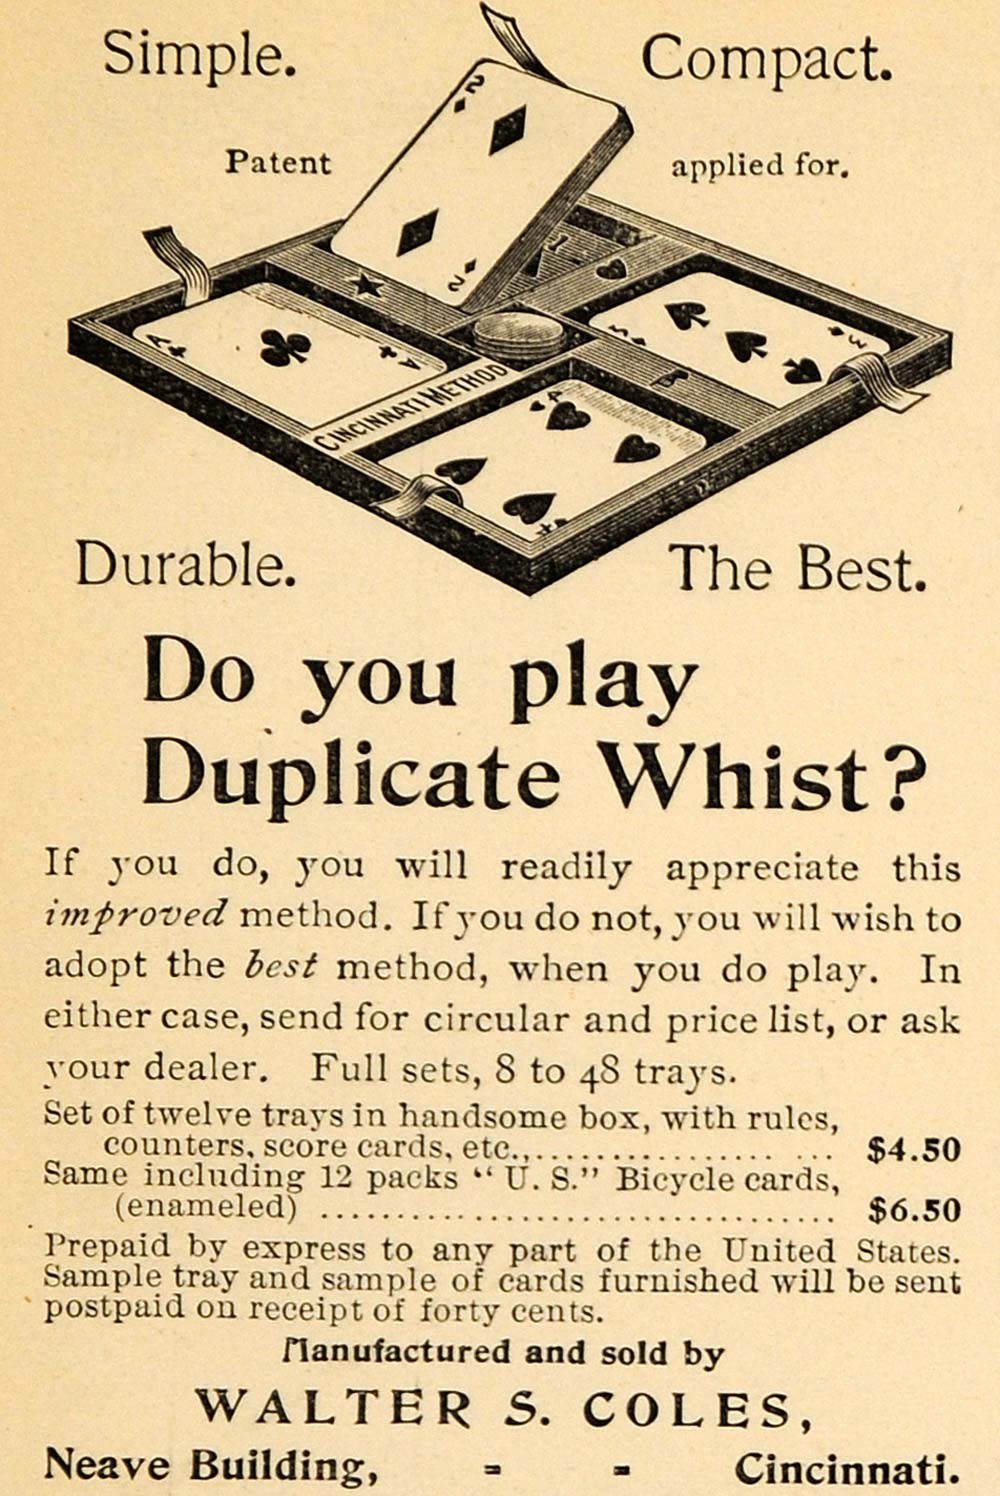 1895 Ad Duplicate Whist Card Game Compact Method Play - ORIGINAL TFO1